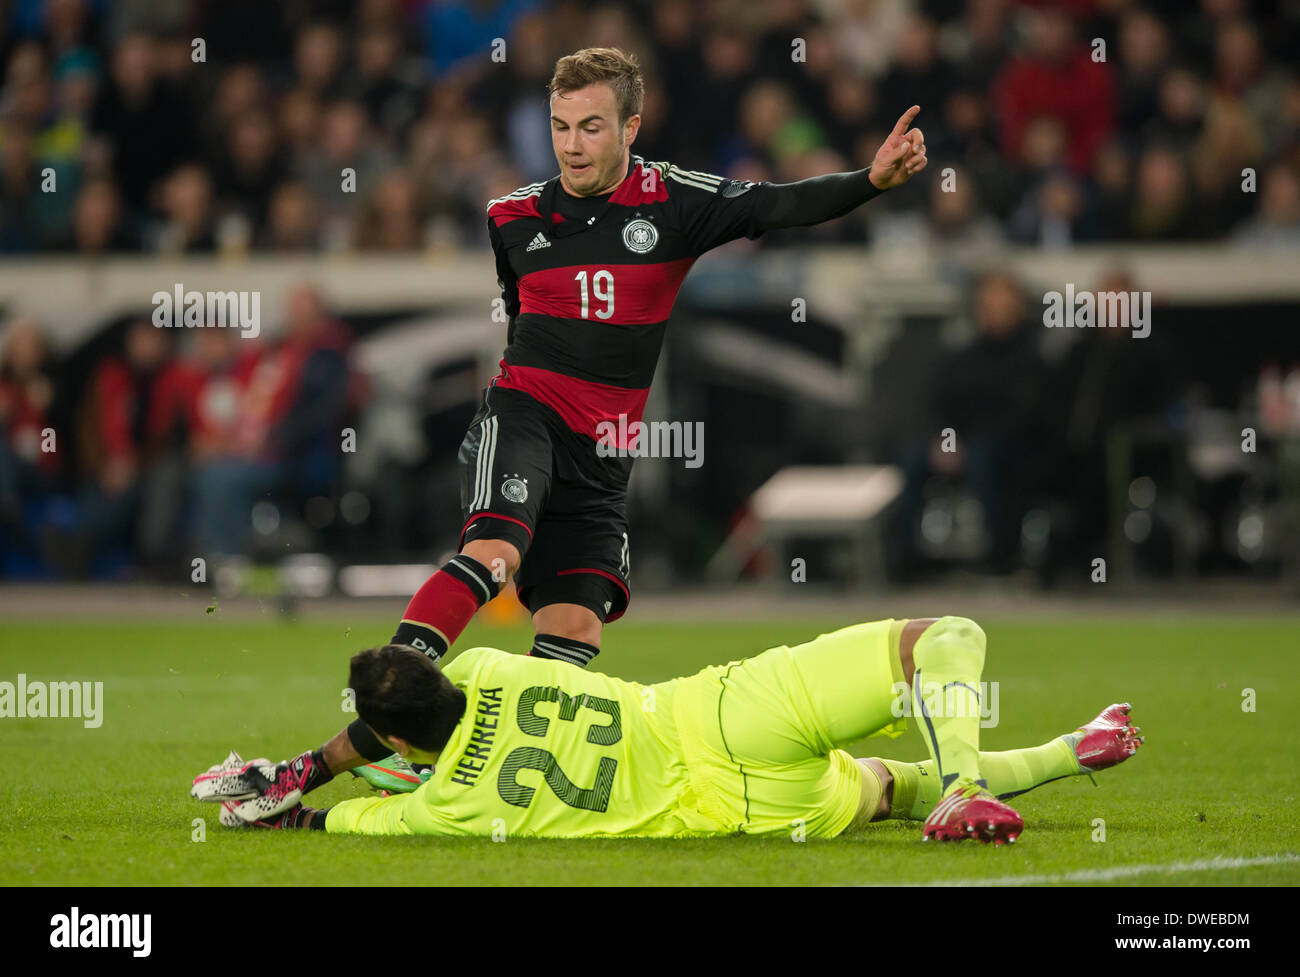 Stuttgart, Germany. 05th Mar, 2014. Germany's Mario Goetze (BACK) against Chile's goal keeper Johnny Herrera during the international match between Germany and Chile at Mercedes-Benz Arena in Stuttgart, Germany, 05 March 2014. Photo: Thomas Eisenhuth/dpa - ATTENTION! NO WIRE SERVICE -/dpa/Alamy Live News Stock Photo